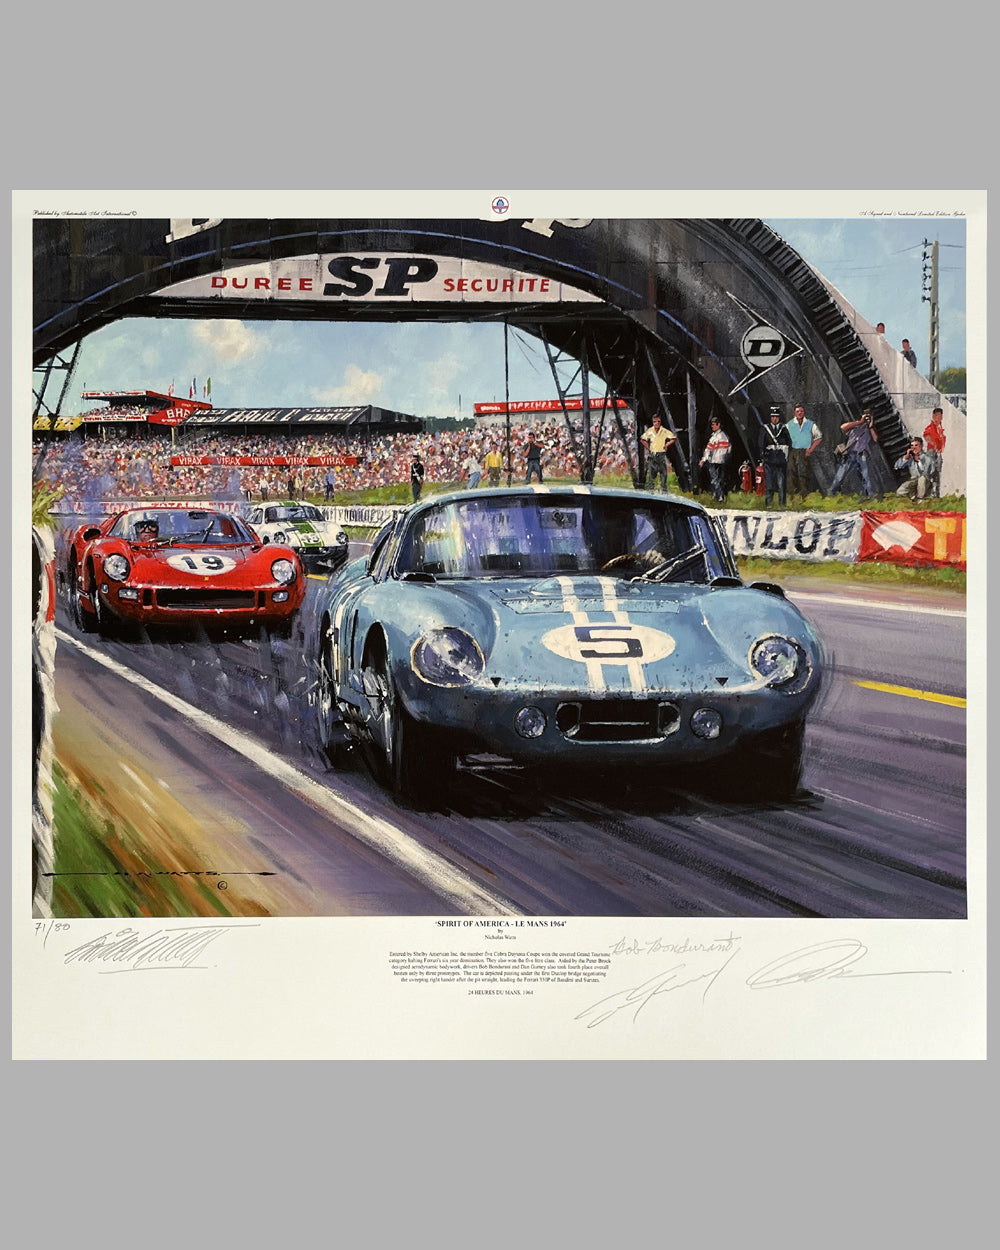 Spirit of America – Le Mans 1964 giclée by Nicholas Watts, hand autographed by Gurney and Bondurant